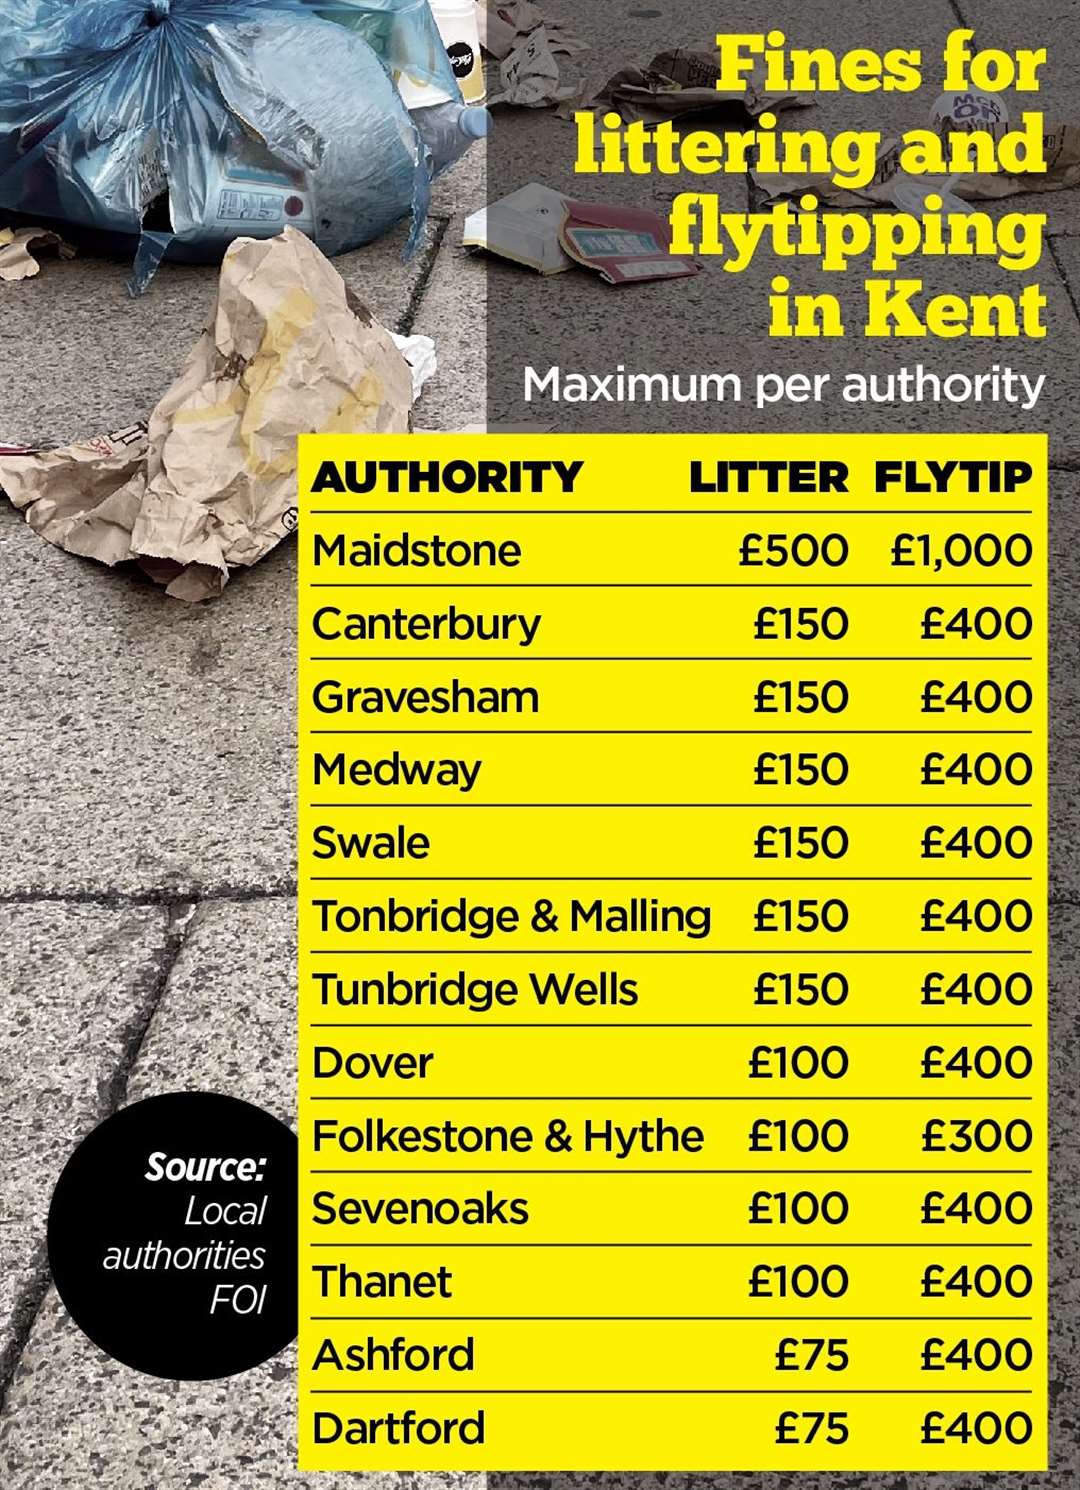 Maidstone has the highest fines for littering and fly-tipping of all local authorities in Kent, while Ashford and Dartford have the lowest